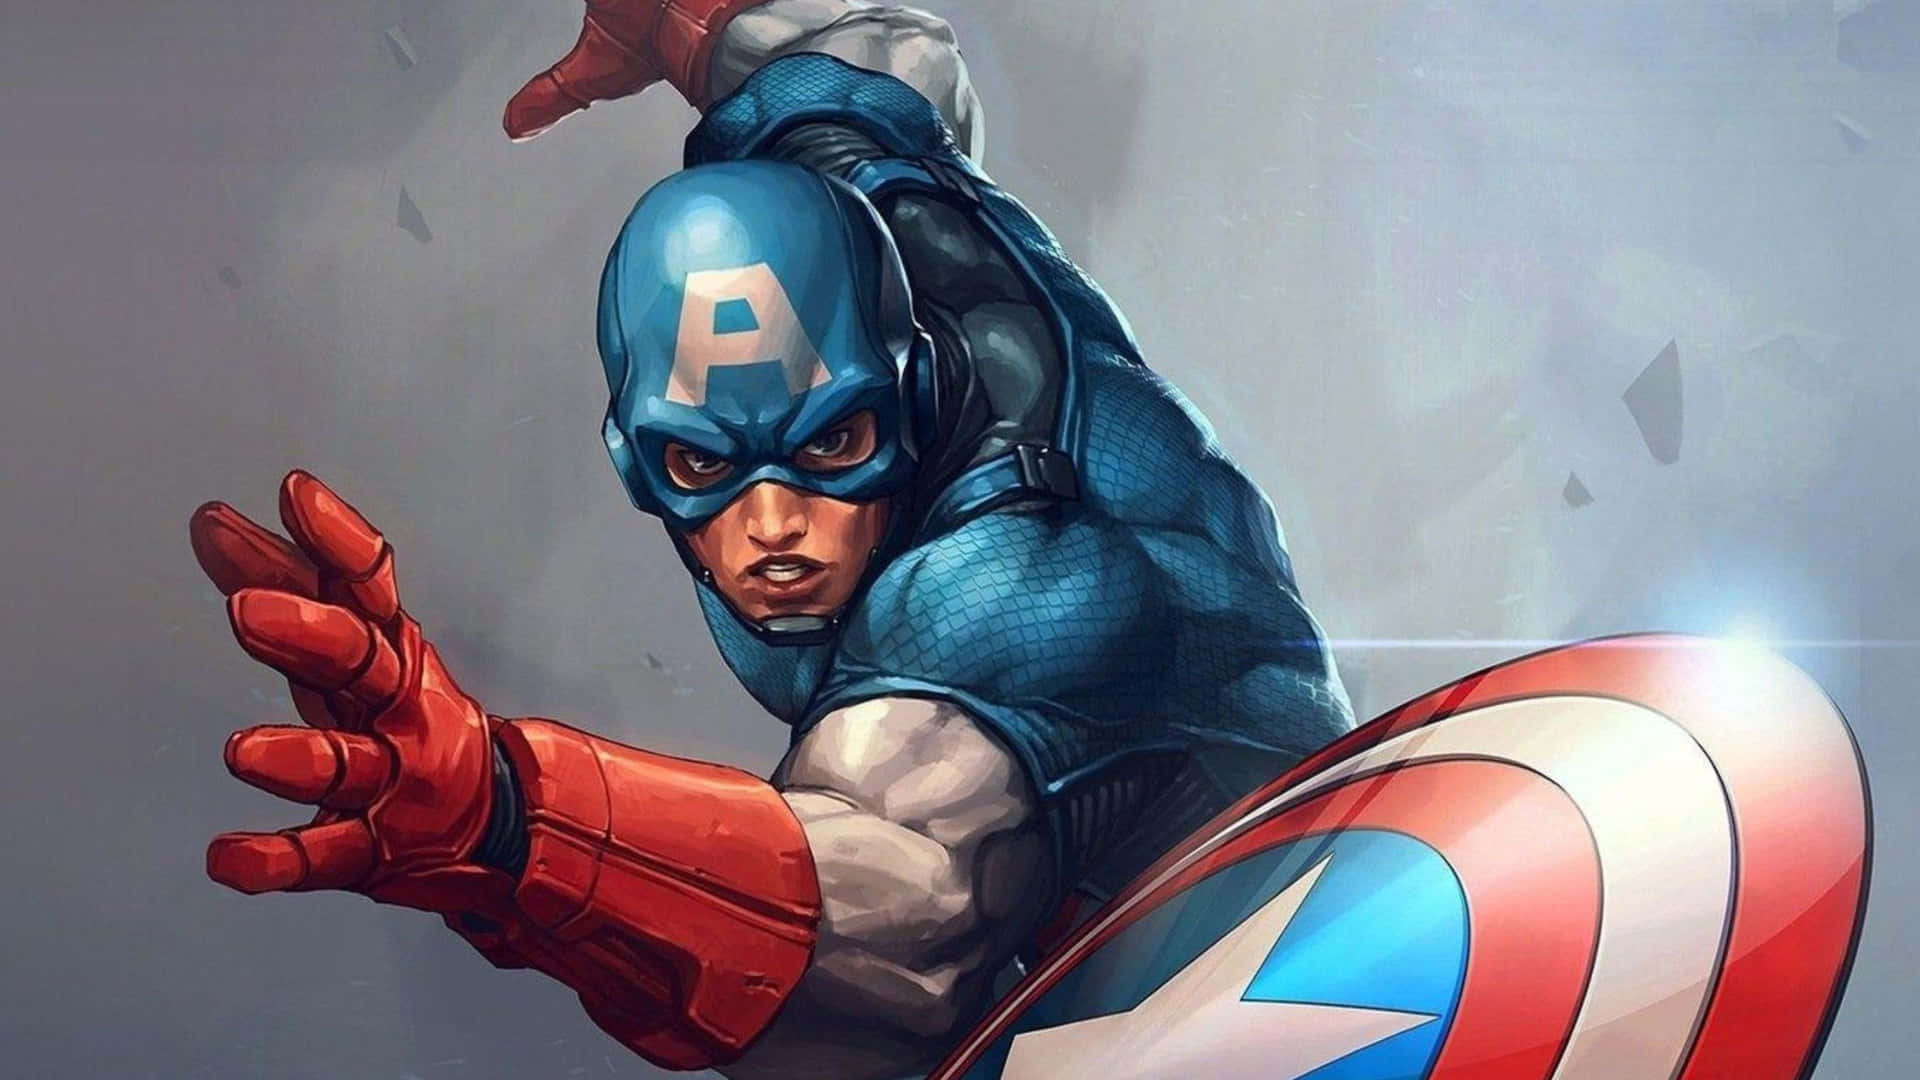 "The leader of the Avengers - it's Captain America!"